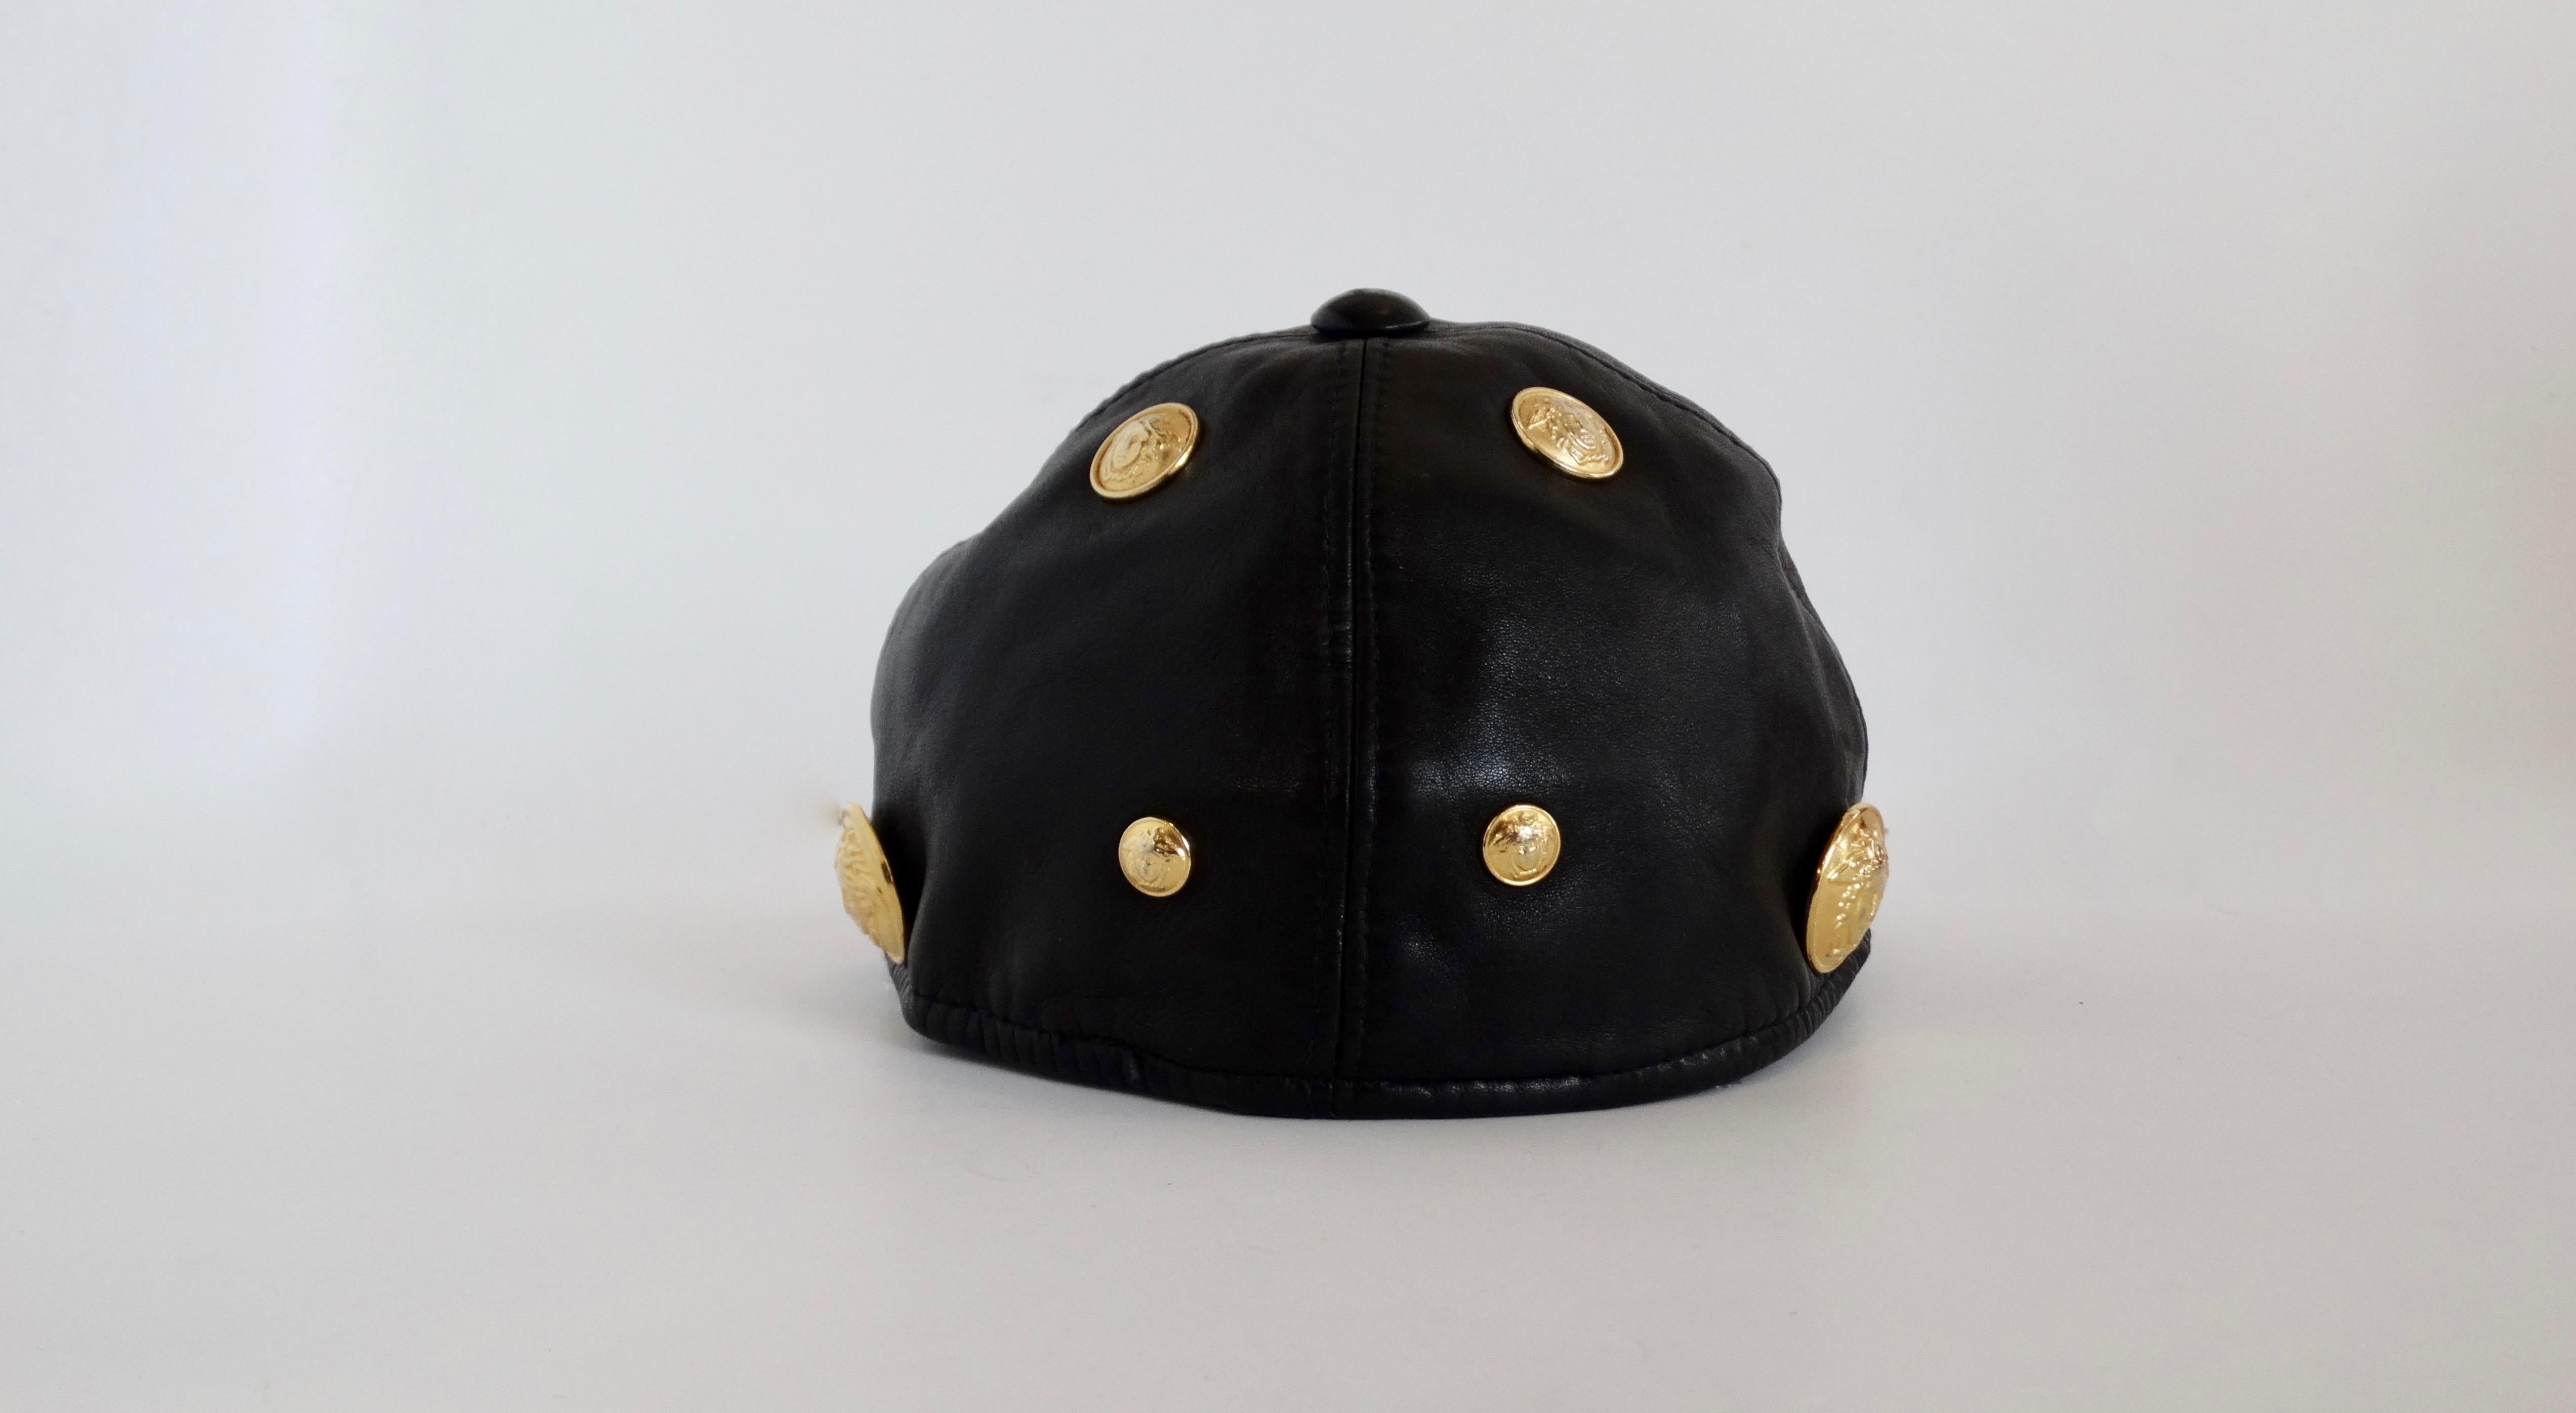 Gianni Versace 1990s Black Leather Medusa Hat In Good Condition For Sale In Scottsdale, AZ